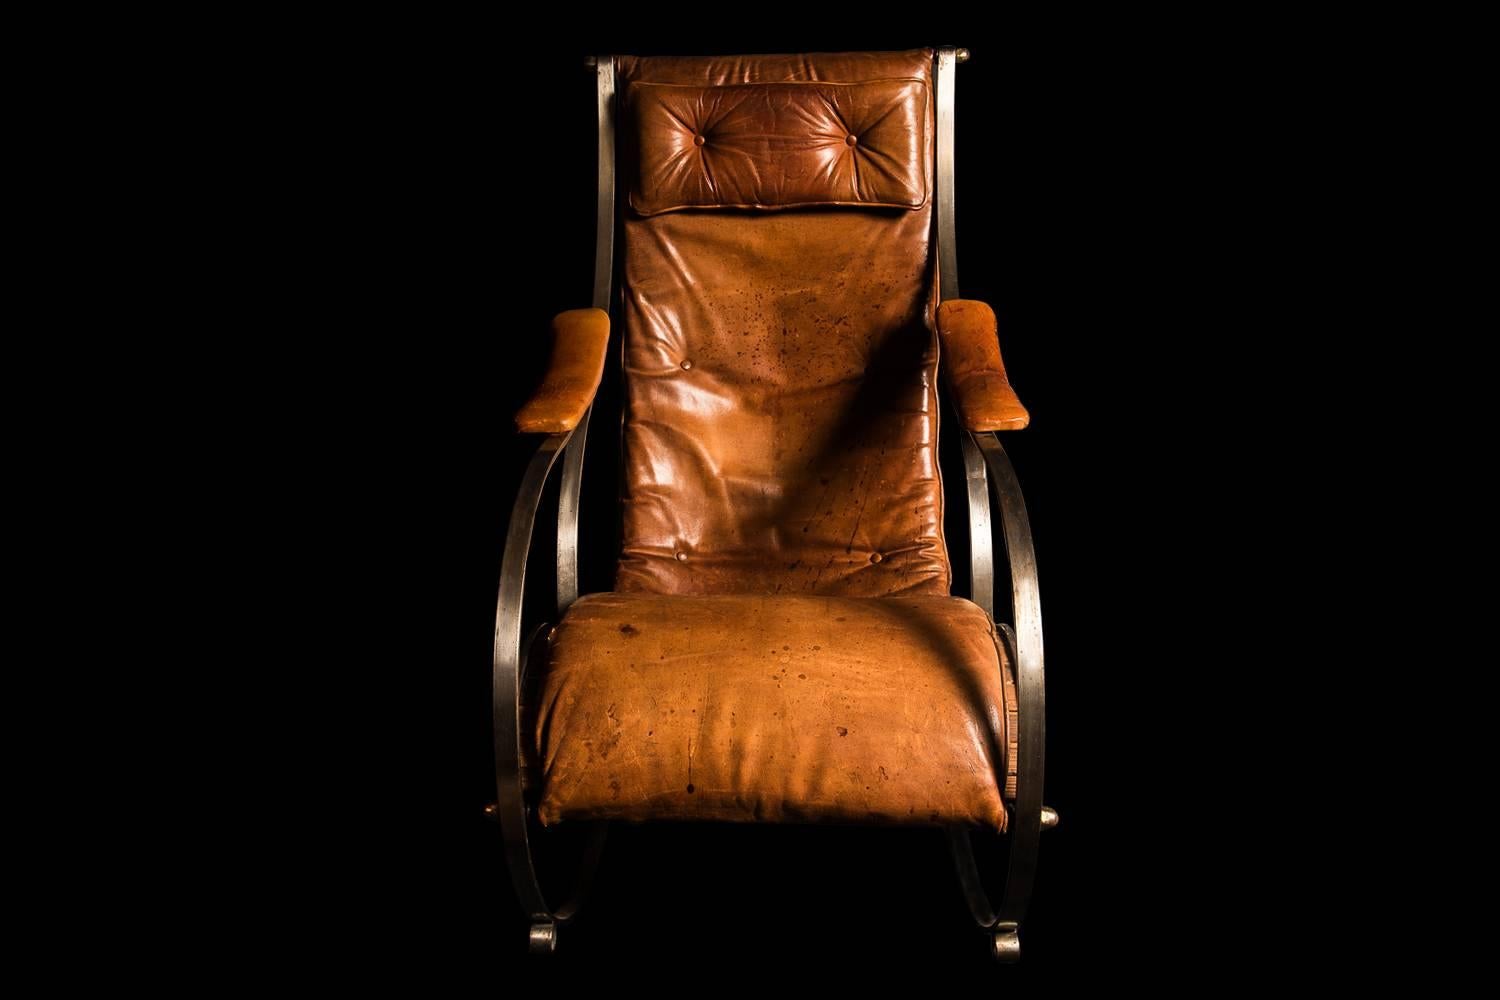 Designed by R Winfield, a landmark modernist piece hugely ahead of its time, as exhibited at the 1851 exhibition. This is a statement chair, with exquisite lines and hugely comfortable. The soft tan leather is original, it is scuffed, but not torn